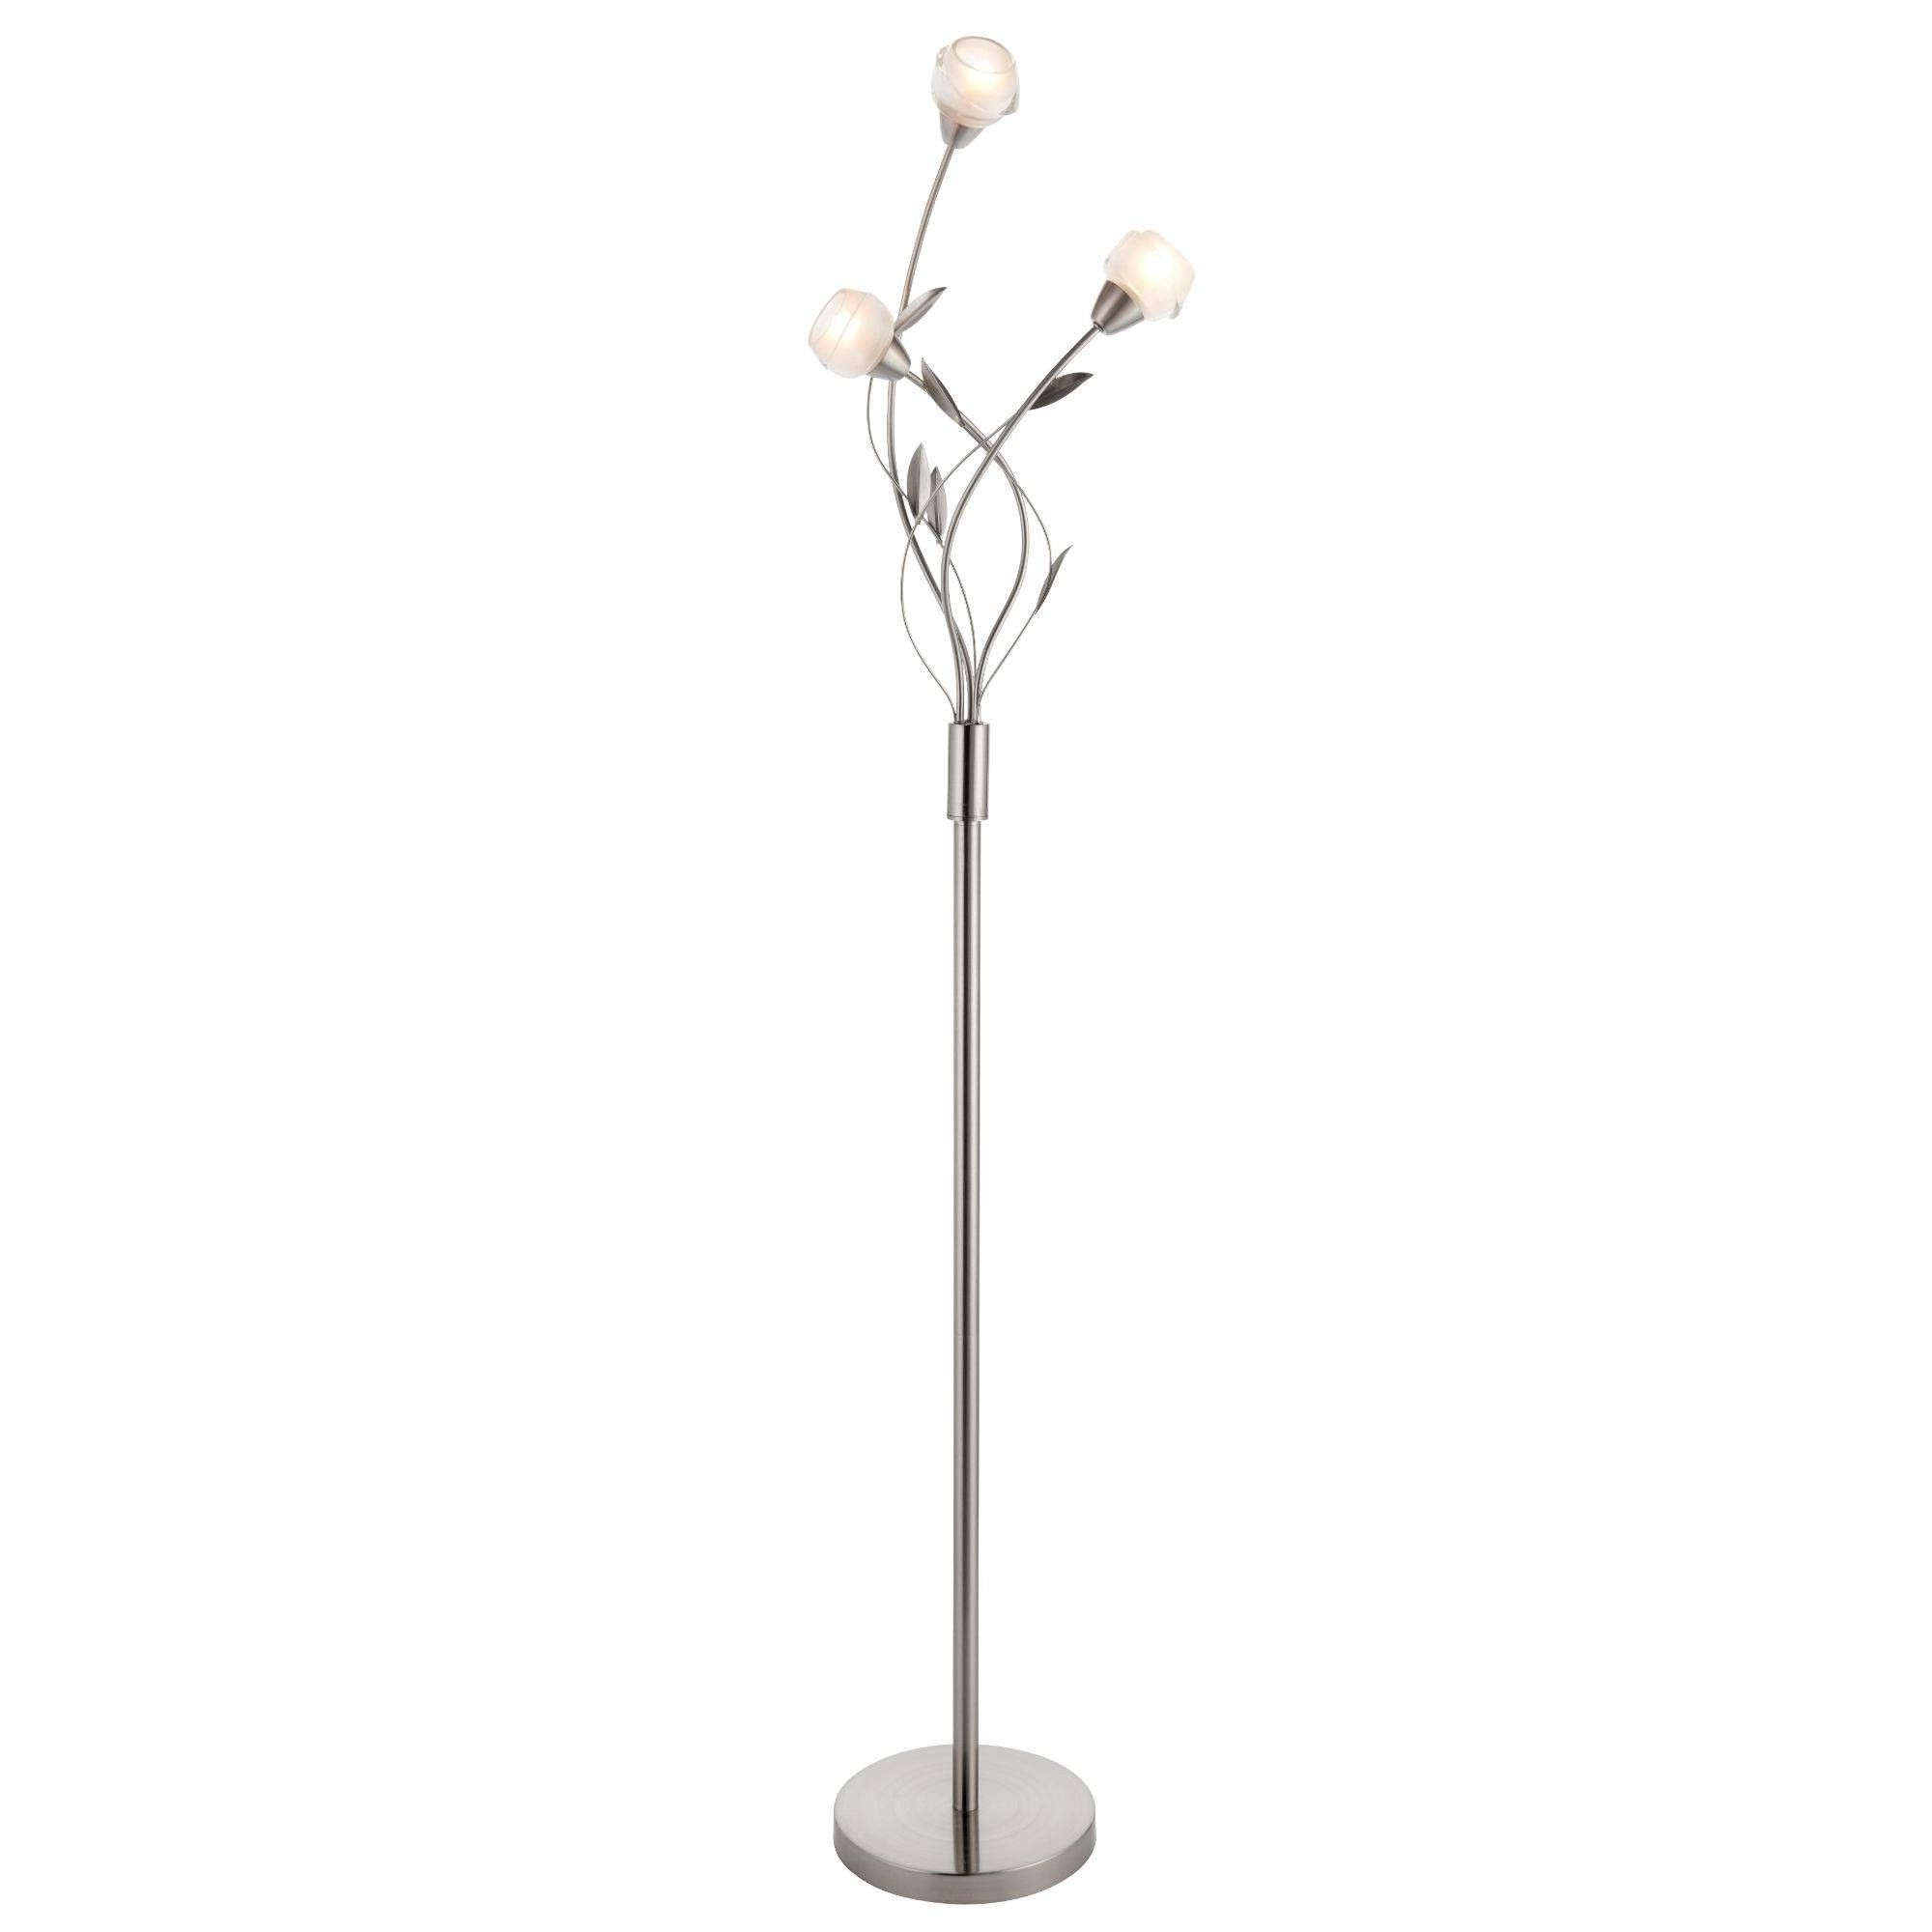 Maywood 3 Light Satin Nickel 165cm Floor Lamp With Glass Shades | Pagazzi  Lighting For Glass Satin Nickel Floor Lamps (View 8 of 20)